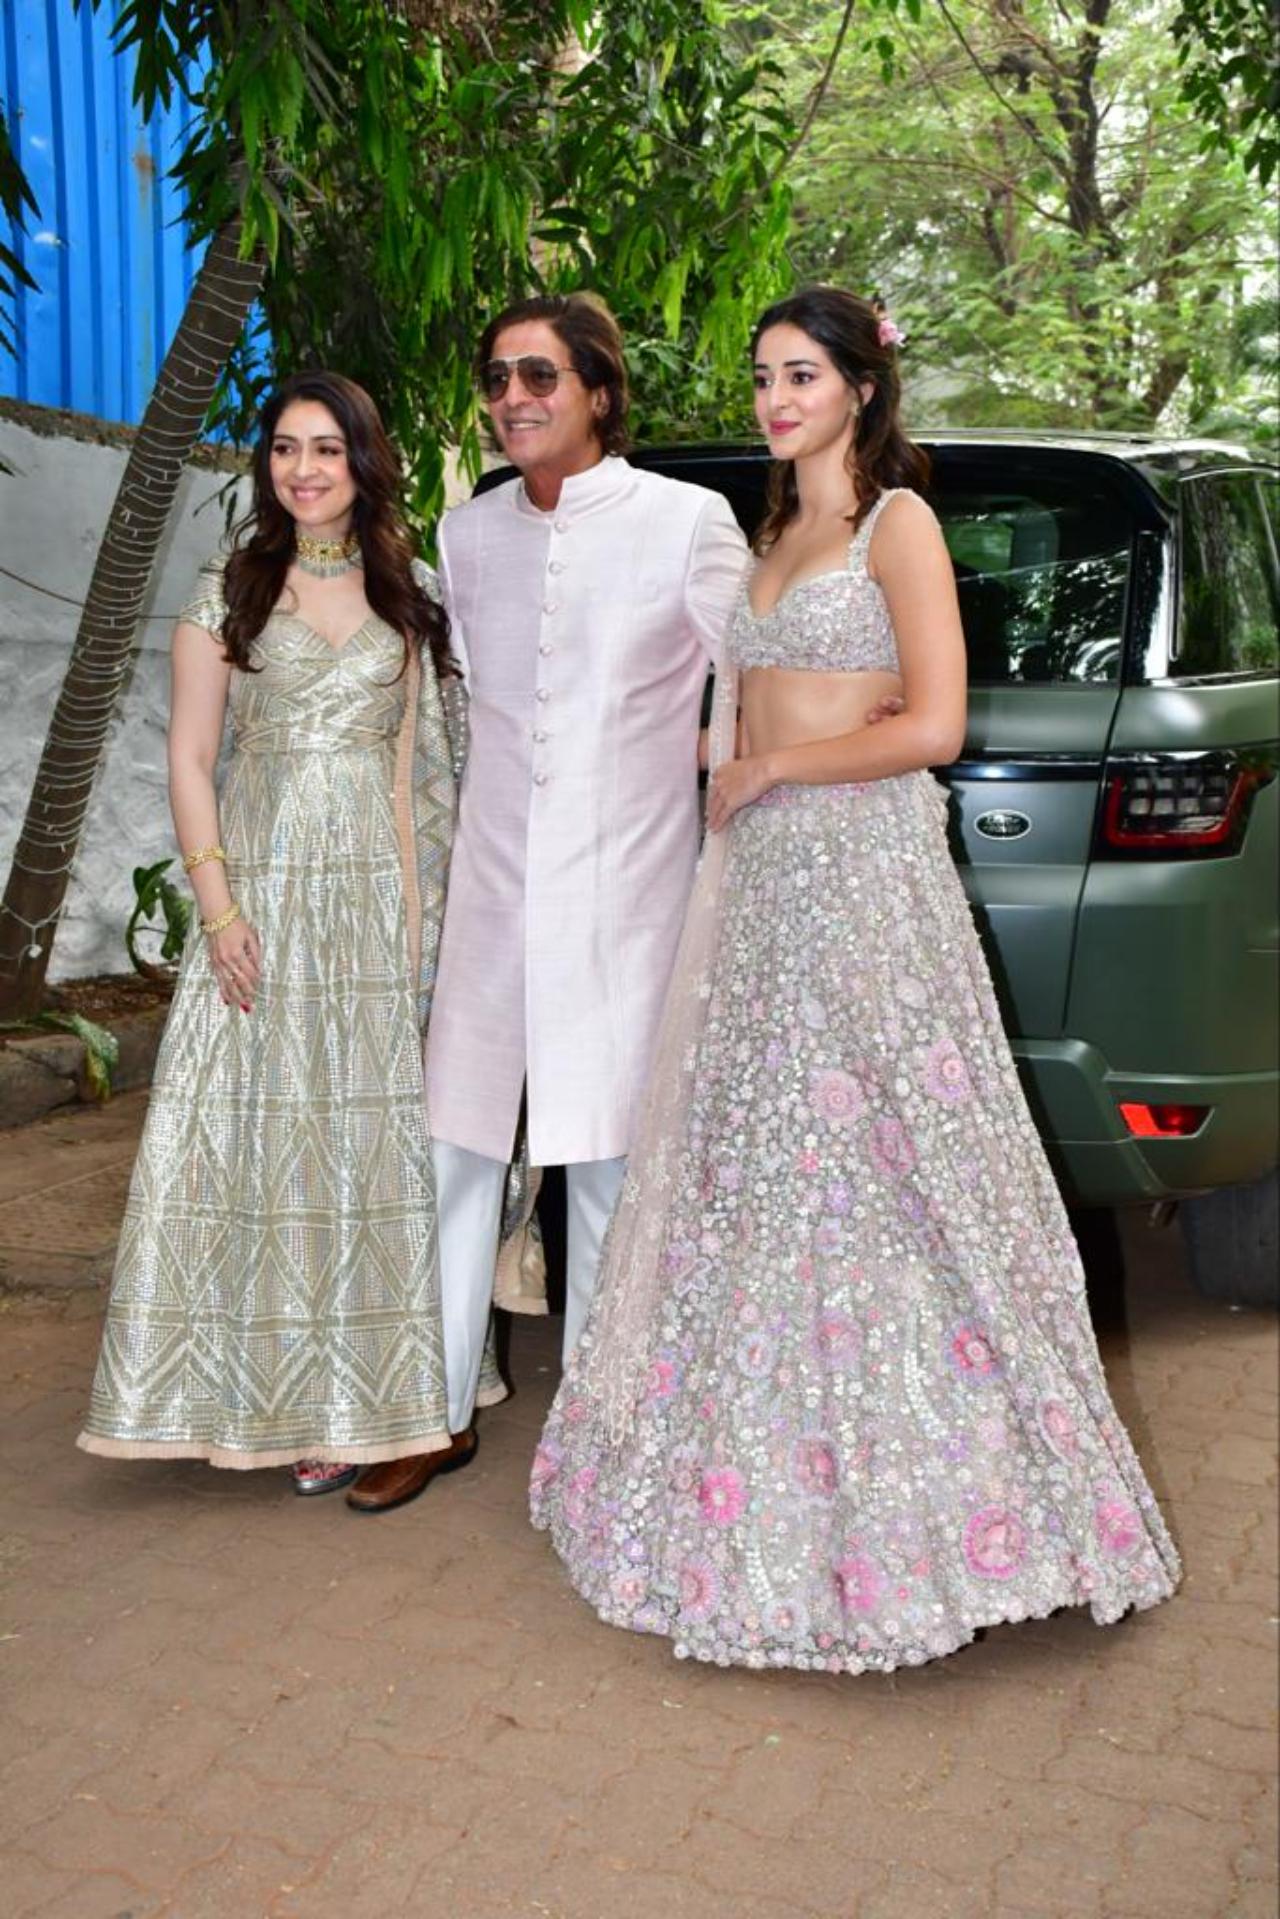 Ananya Panday poses with her parents Chunky and Bhavana Pandey. The Pandey family colour co-ordinated in white outfits. The bride-to-be is the daughter of Chunky's brother